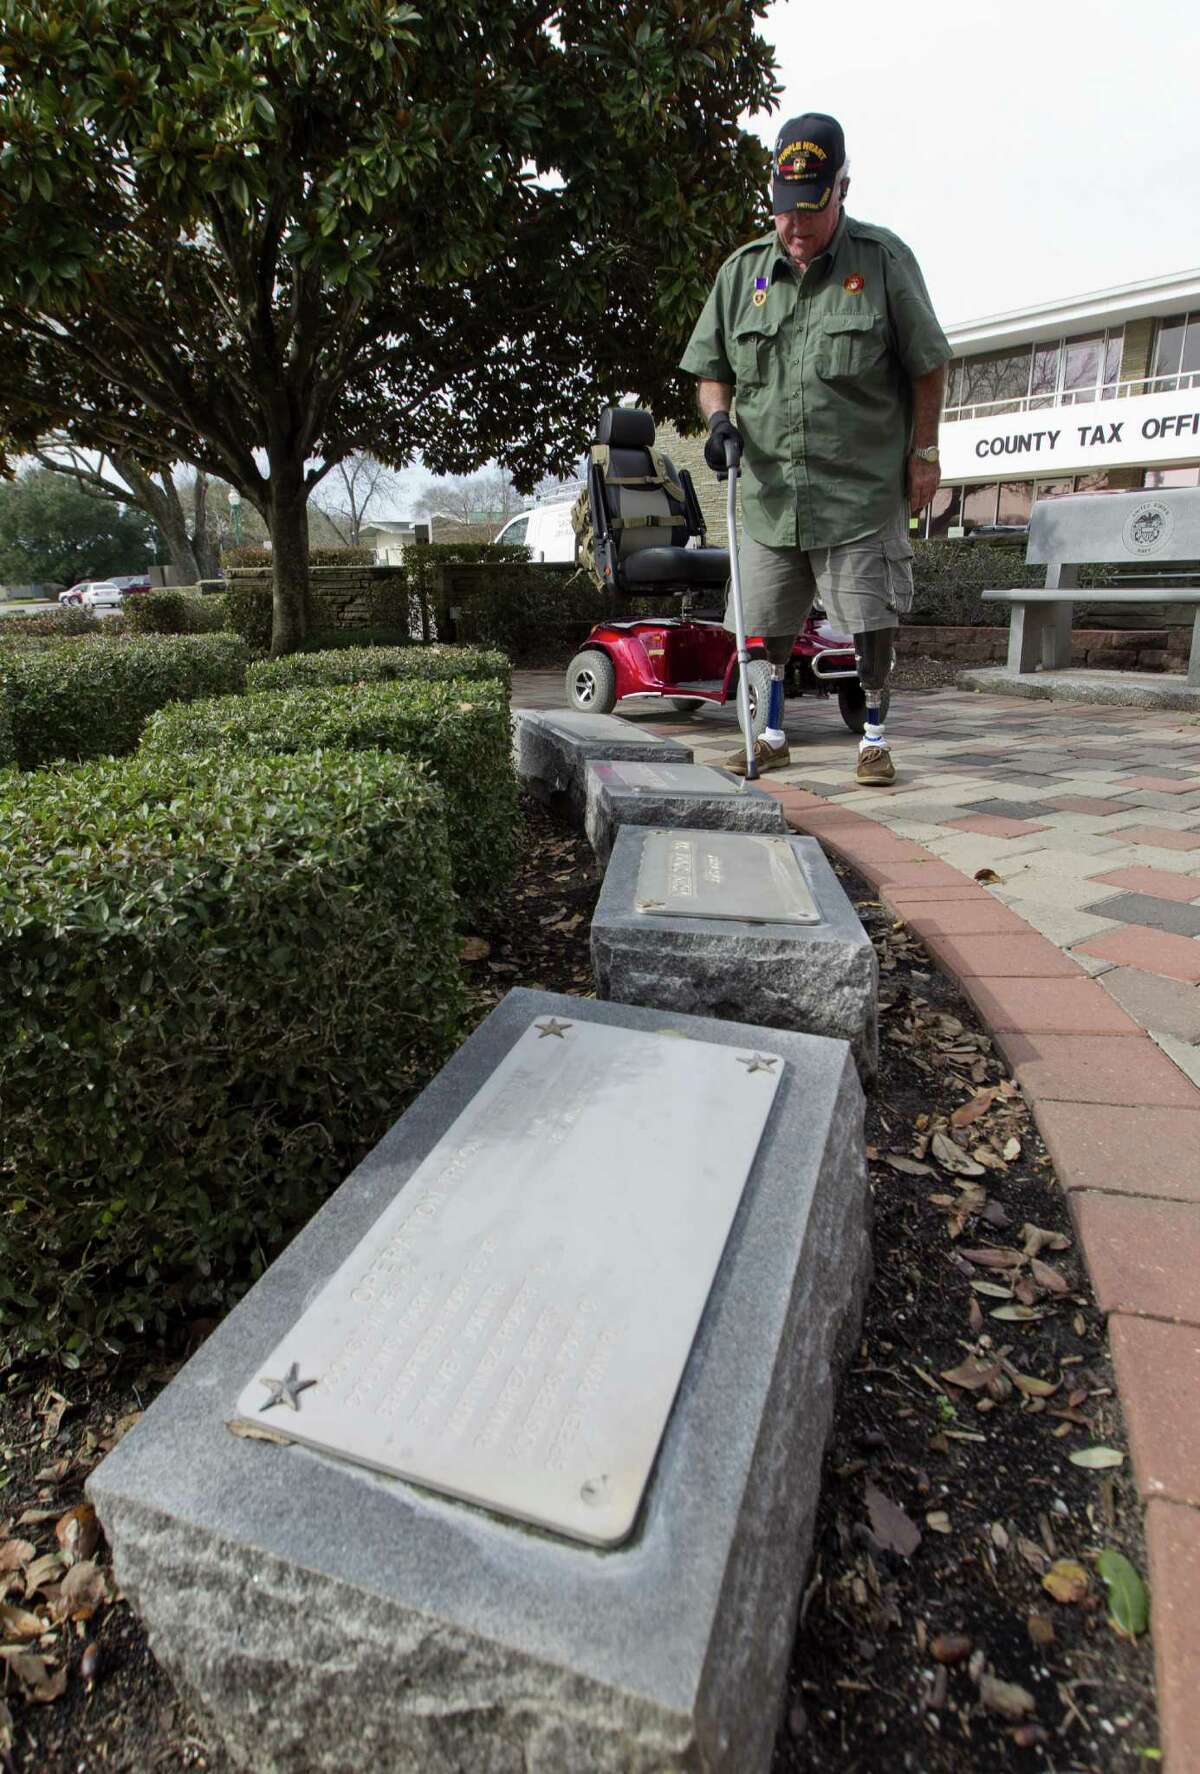 Retired United States Marine Corps Cpl. Jimmie Edwards III looks over former classmates lost serving in Vietnam during a visit to Montgomery County War Memorial Park Friday, Jan. 20, 2017, in Conroe.